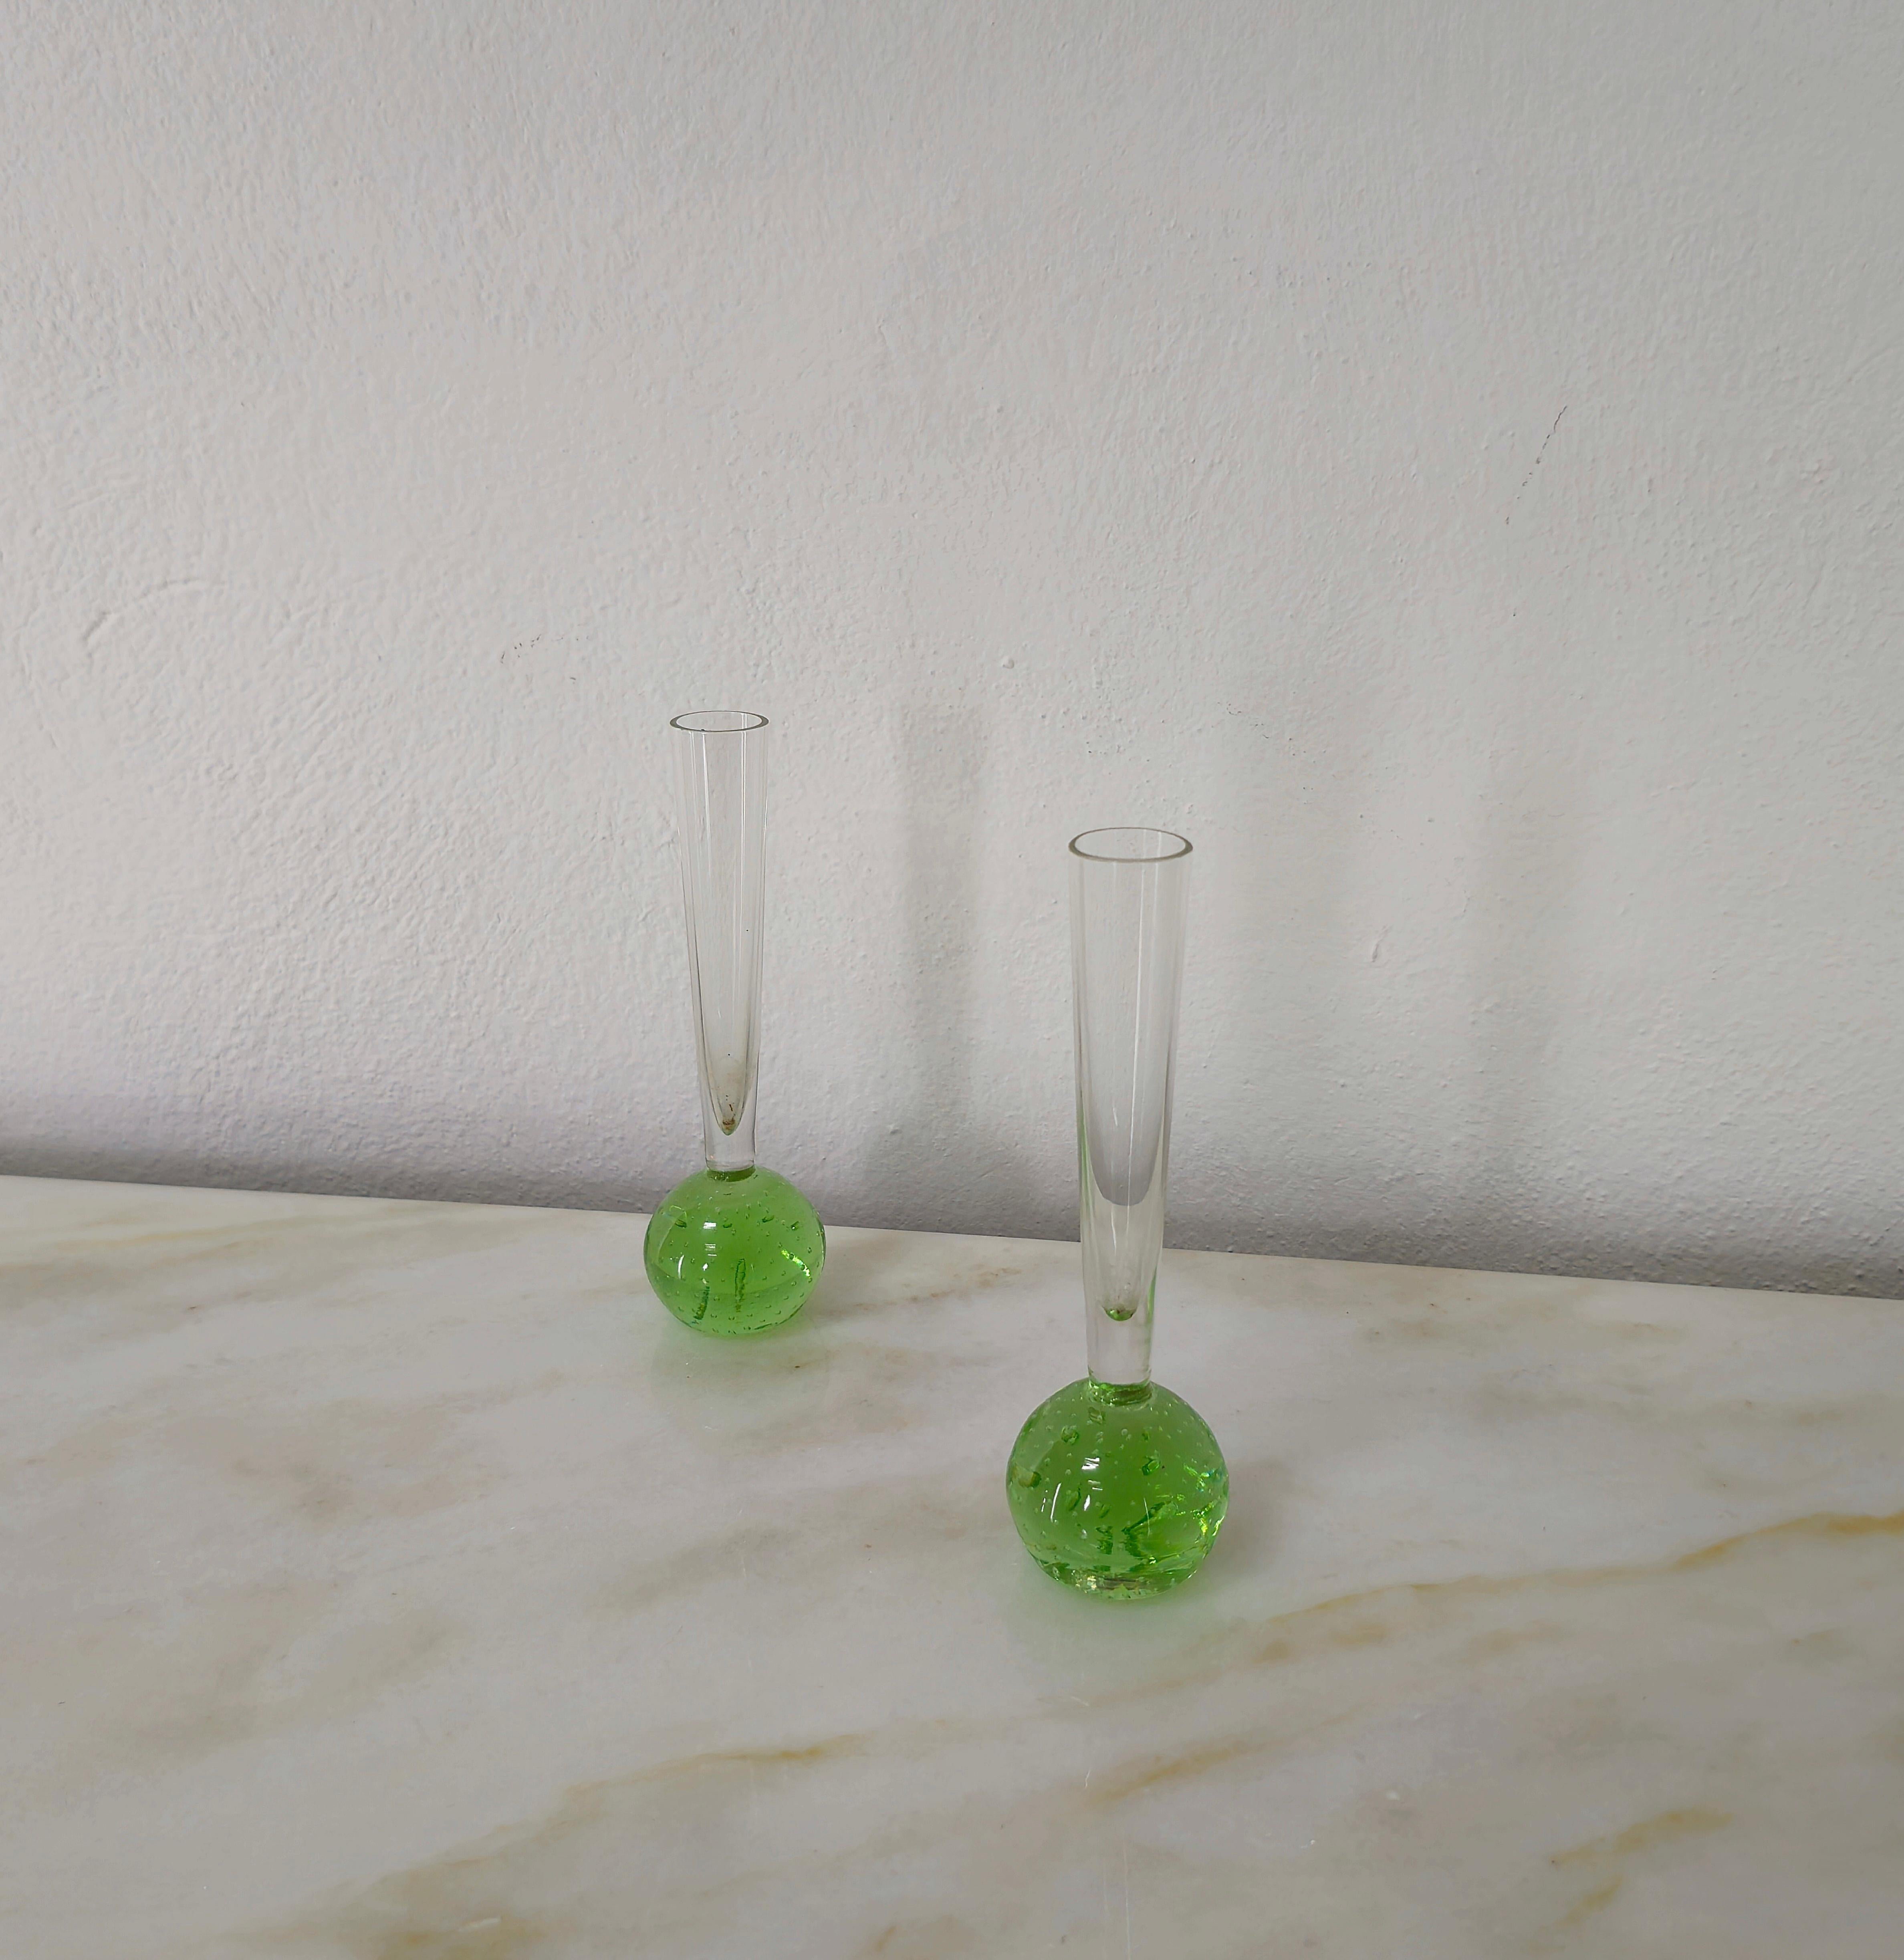 20th Century Decorative Objects Vases Murano Glass Midcentury Italian Design 1970s Set of 2 For Sale